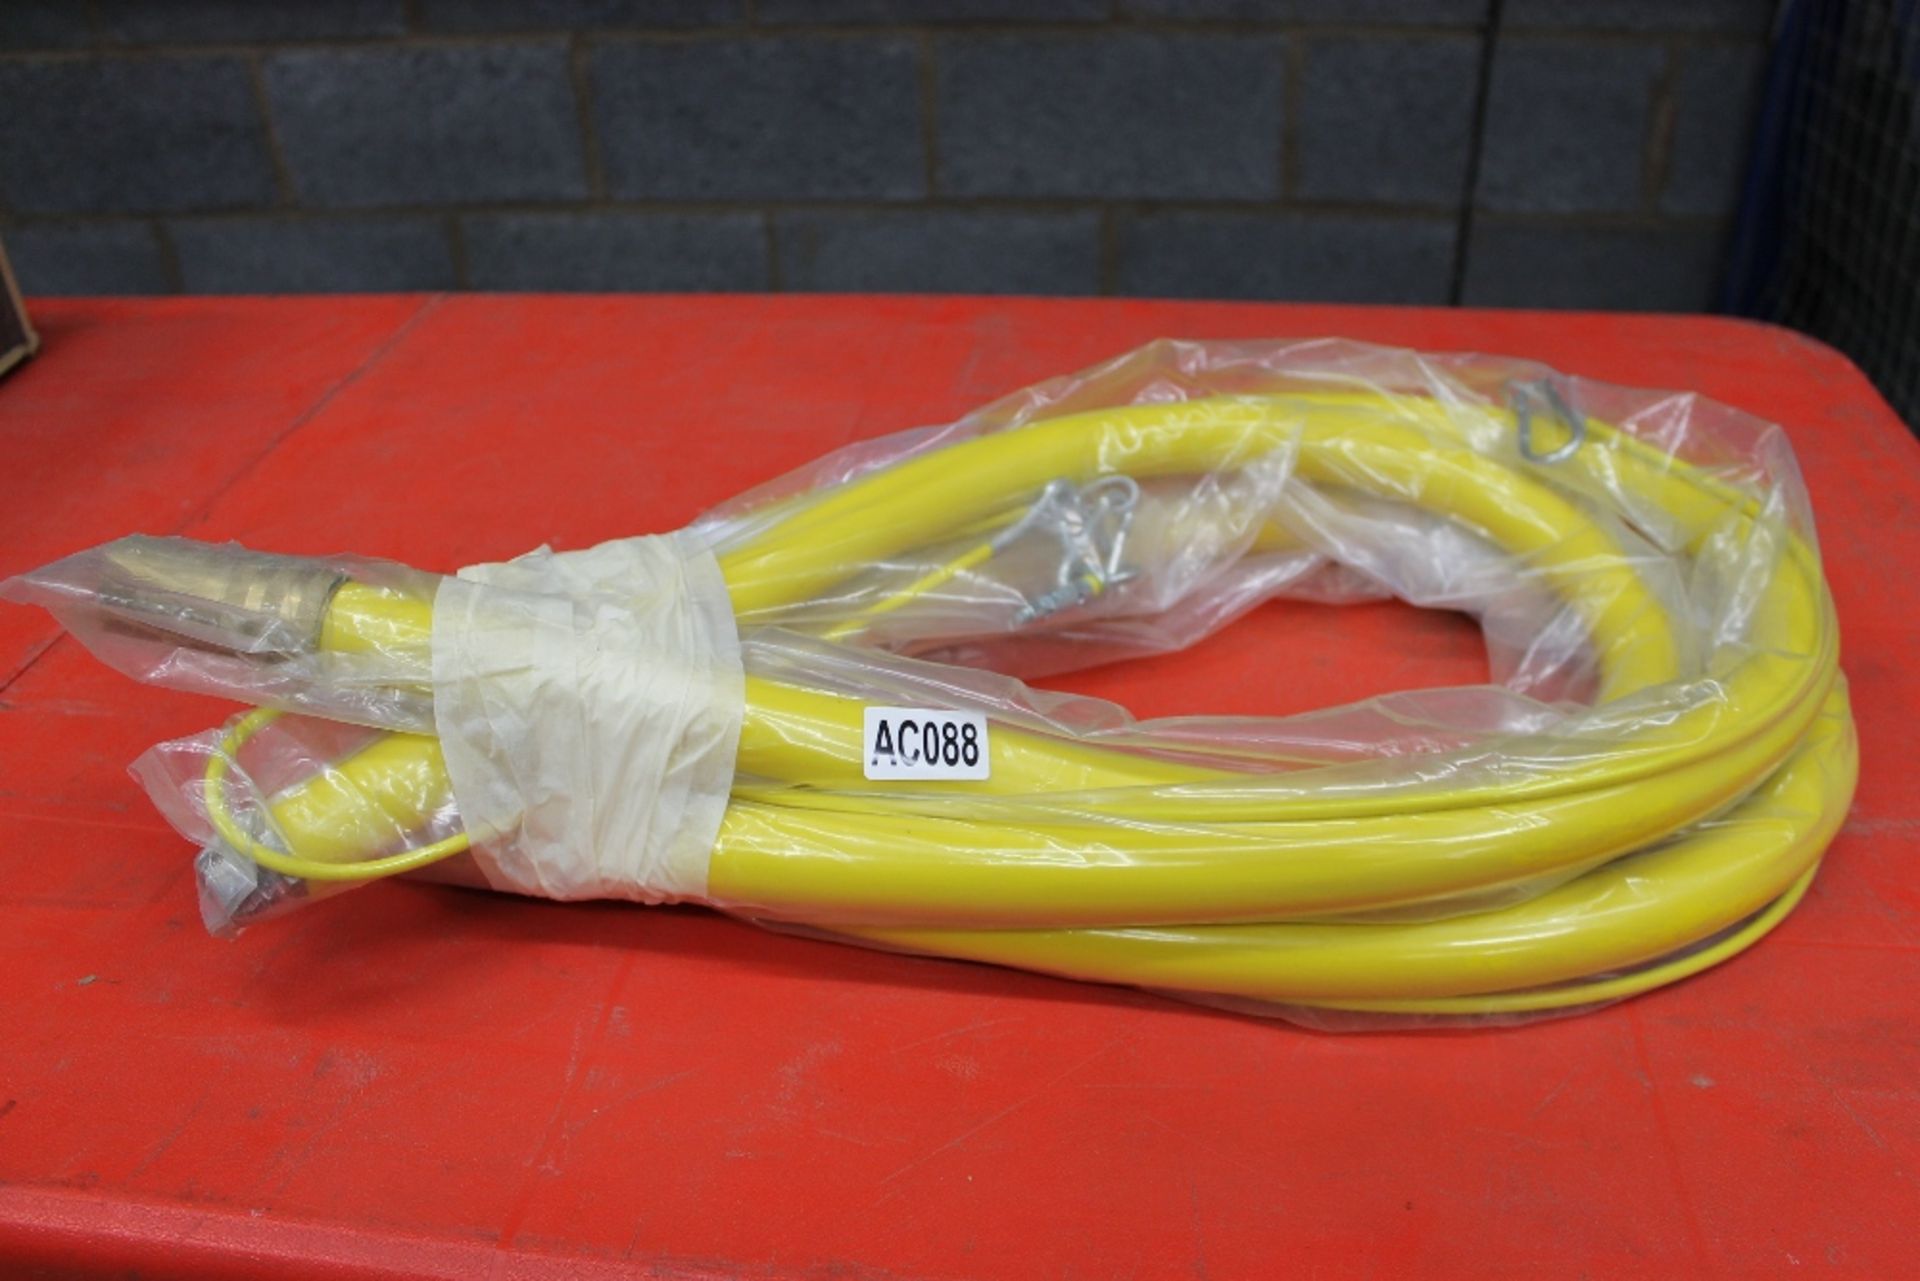 3×3/4" armed gas hoses with restrainers  48"